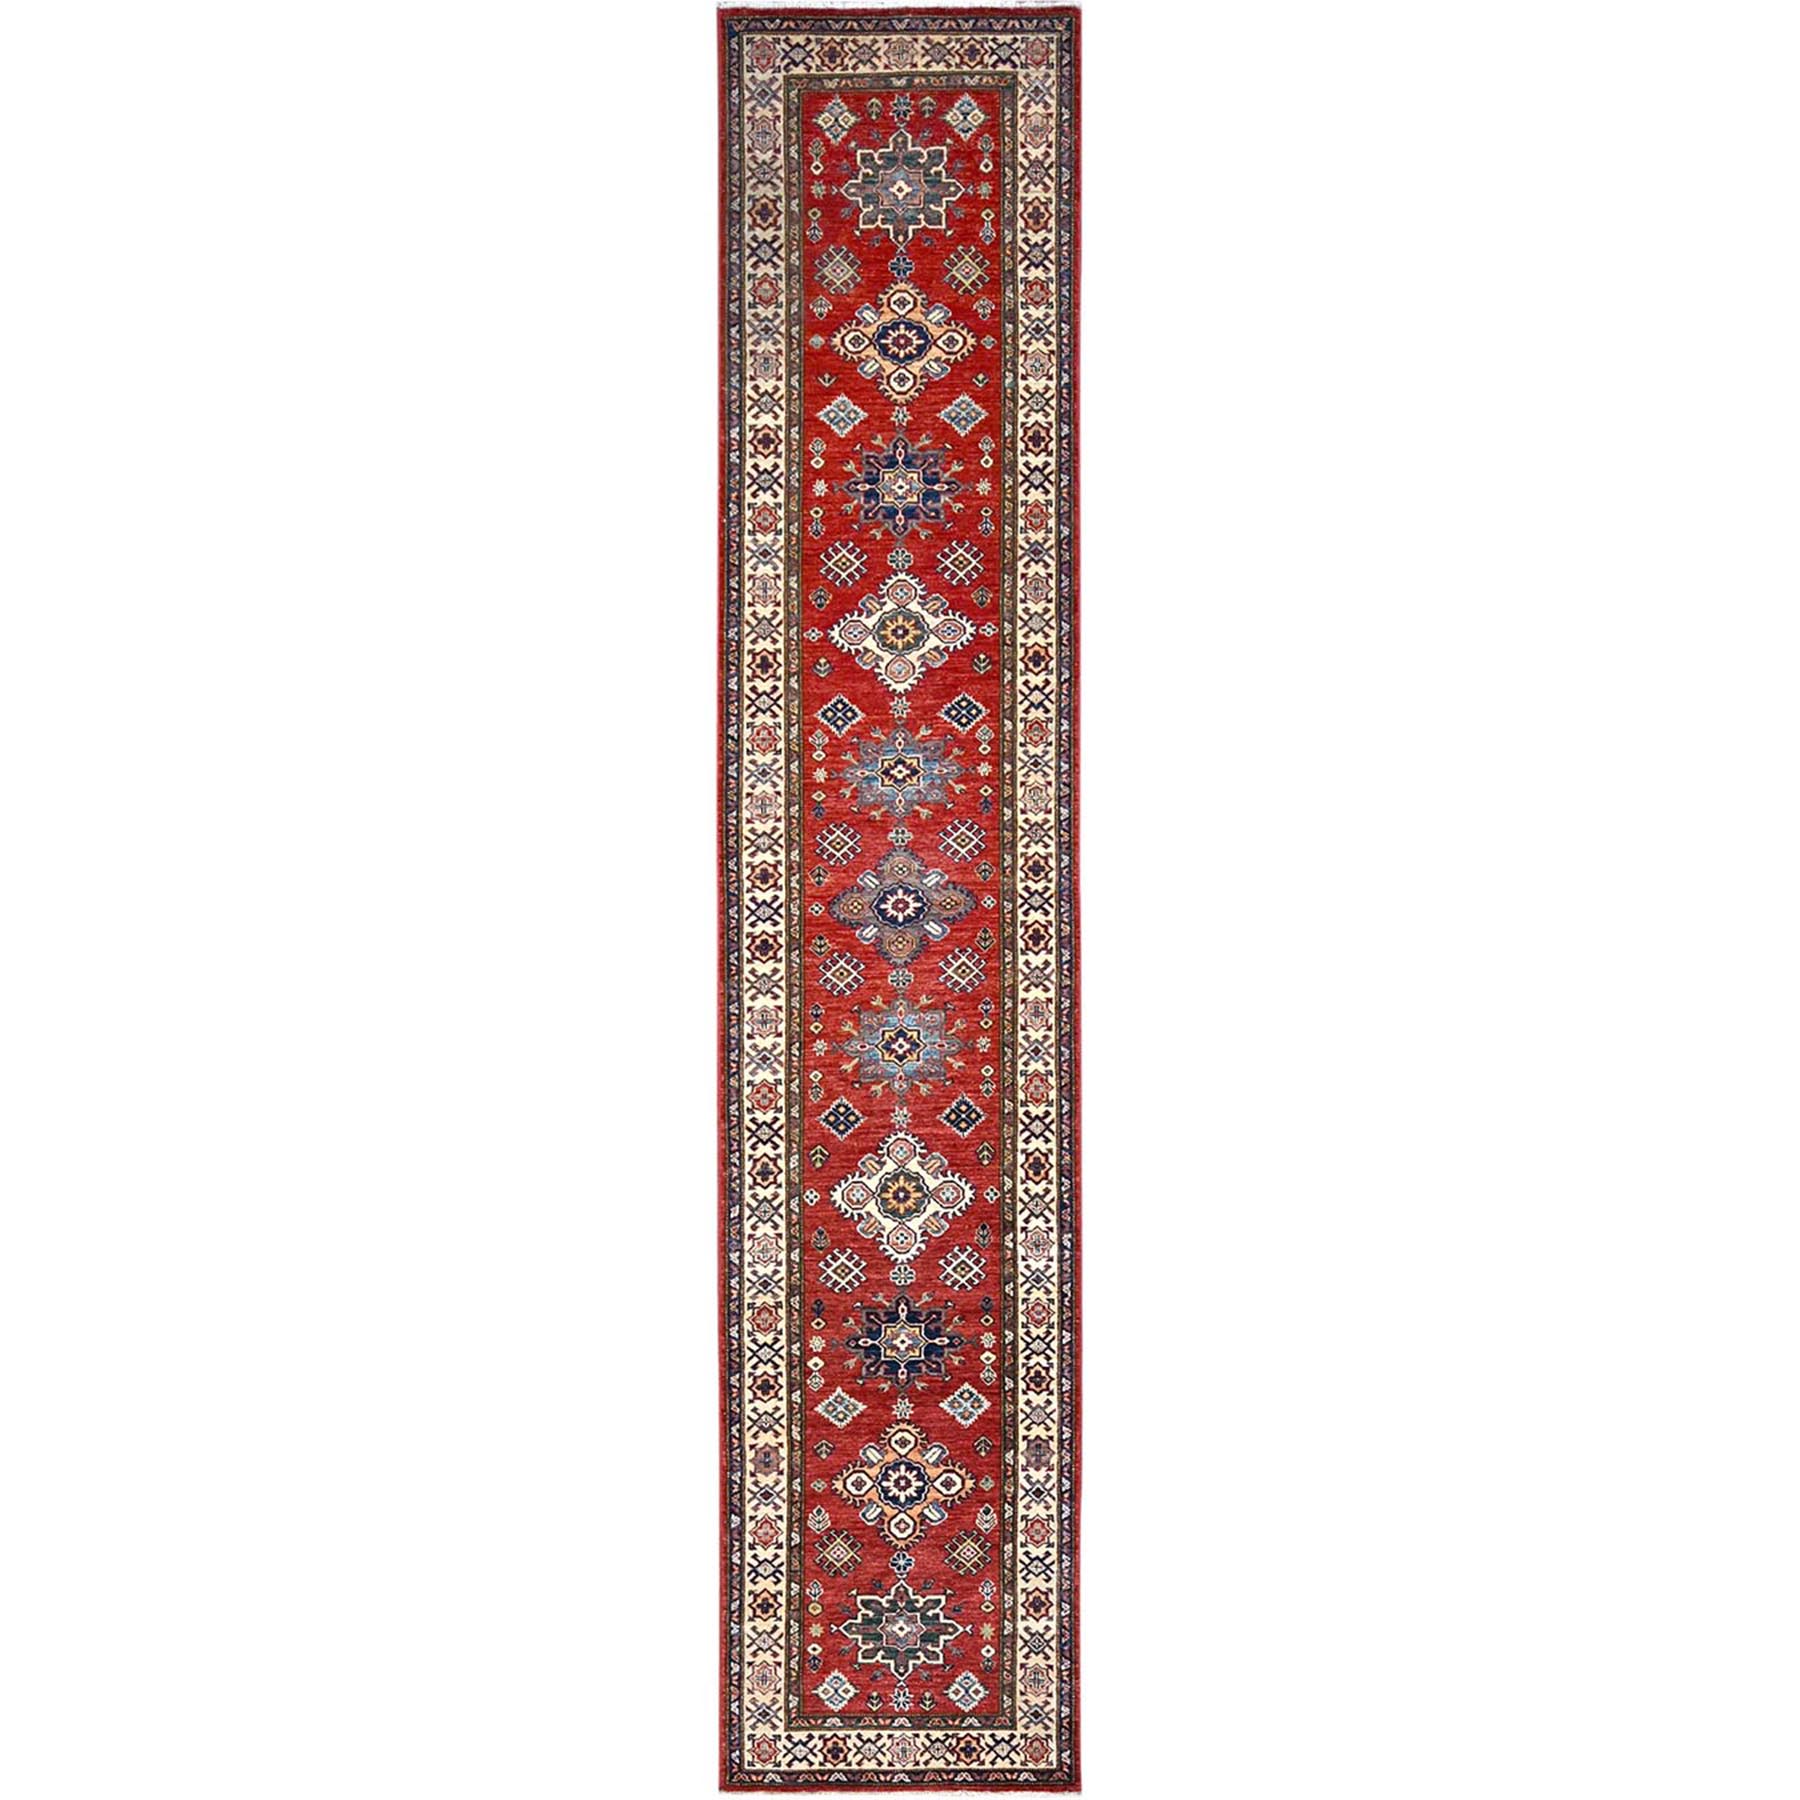 Heritage Red, Afghan Super Kazak, Geometric Medallions Design, Organic Dyes, Denser Weave, Hand Knotted, Soft and Shiny Wool,  Runner Oriental Rug